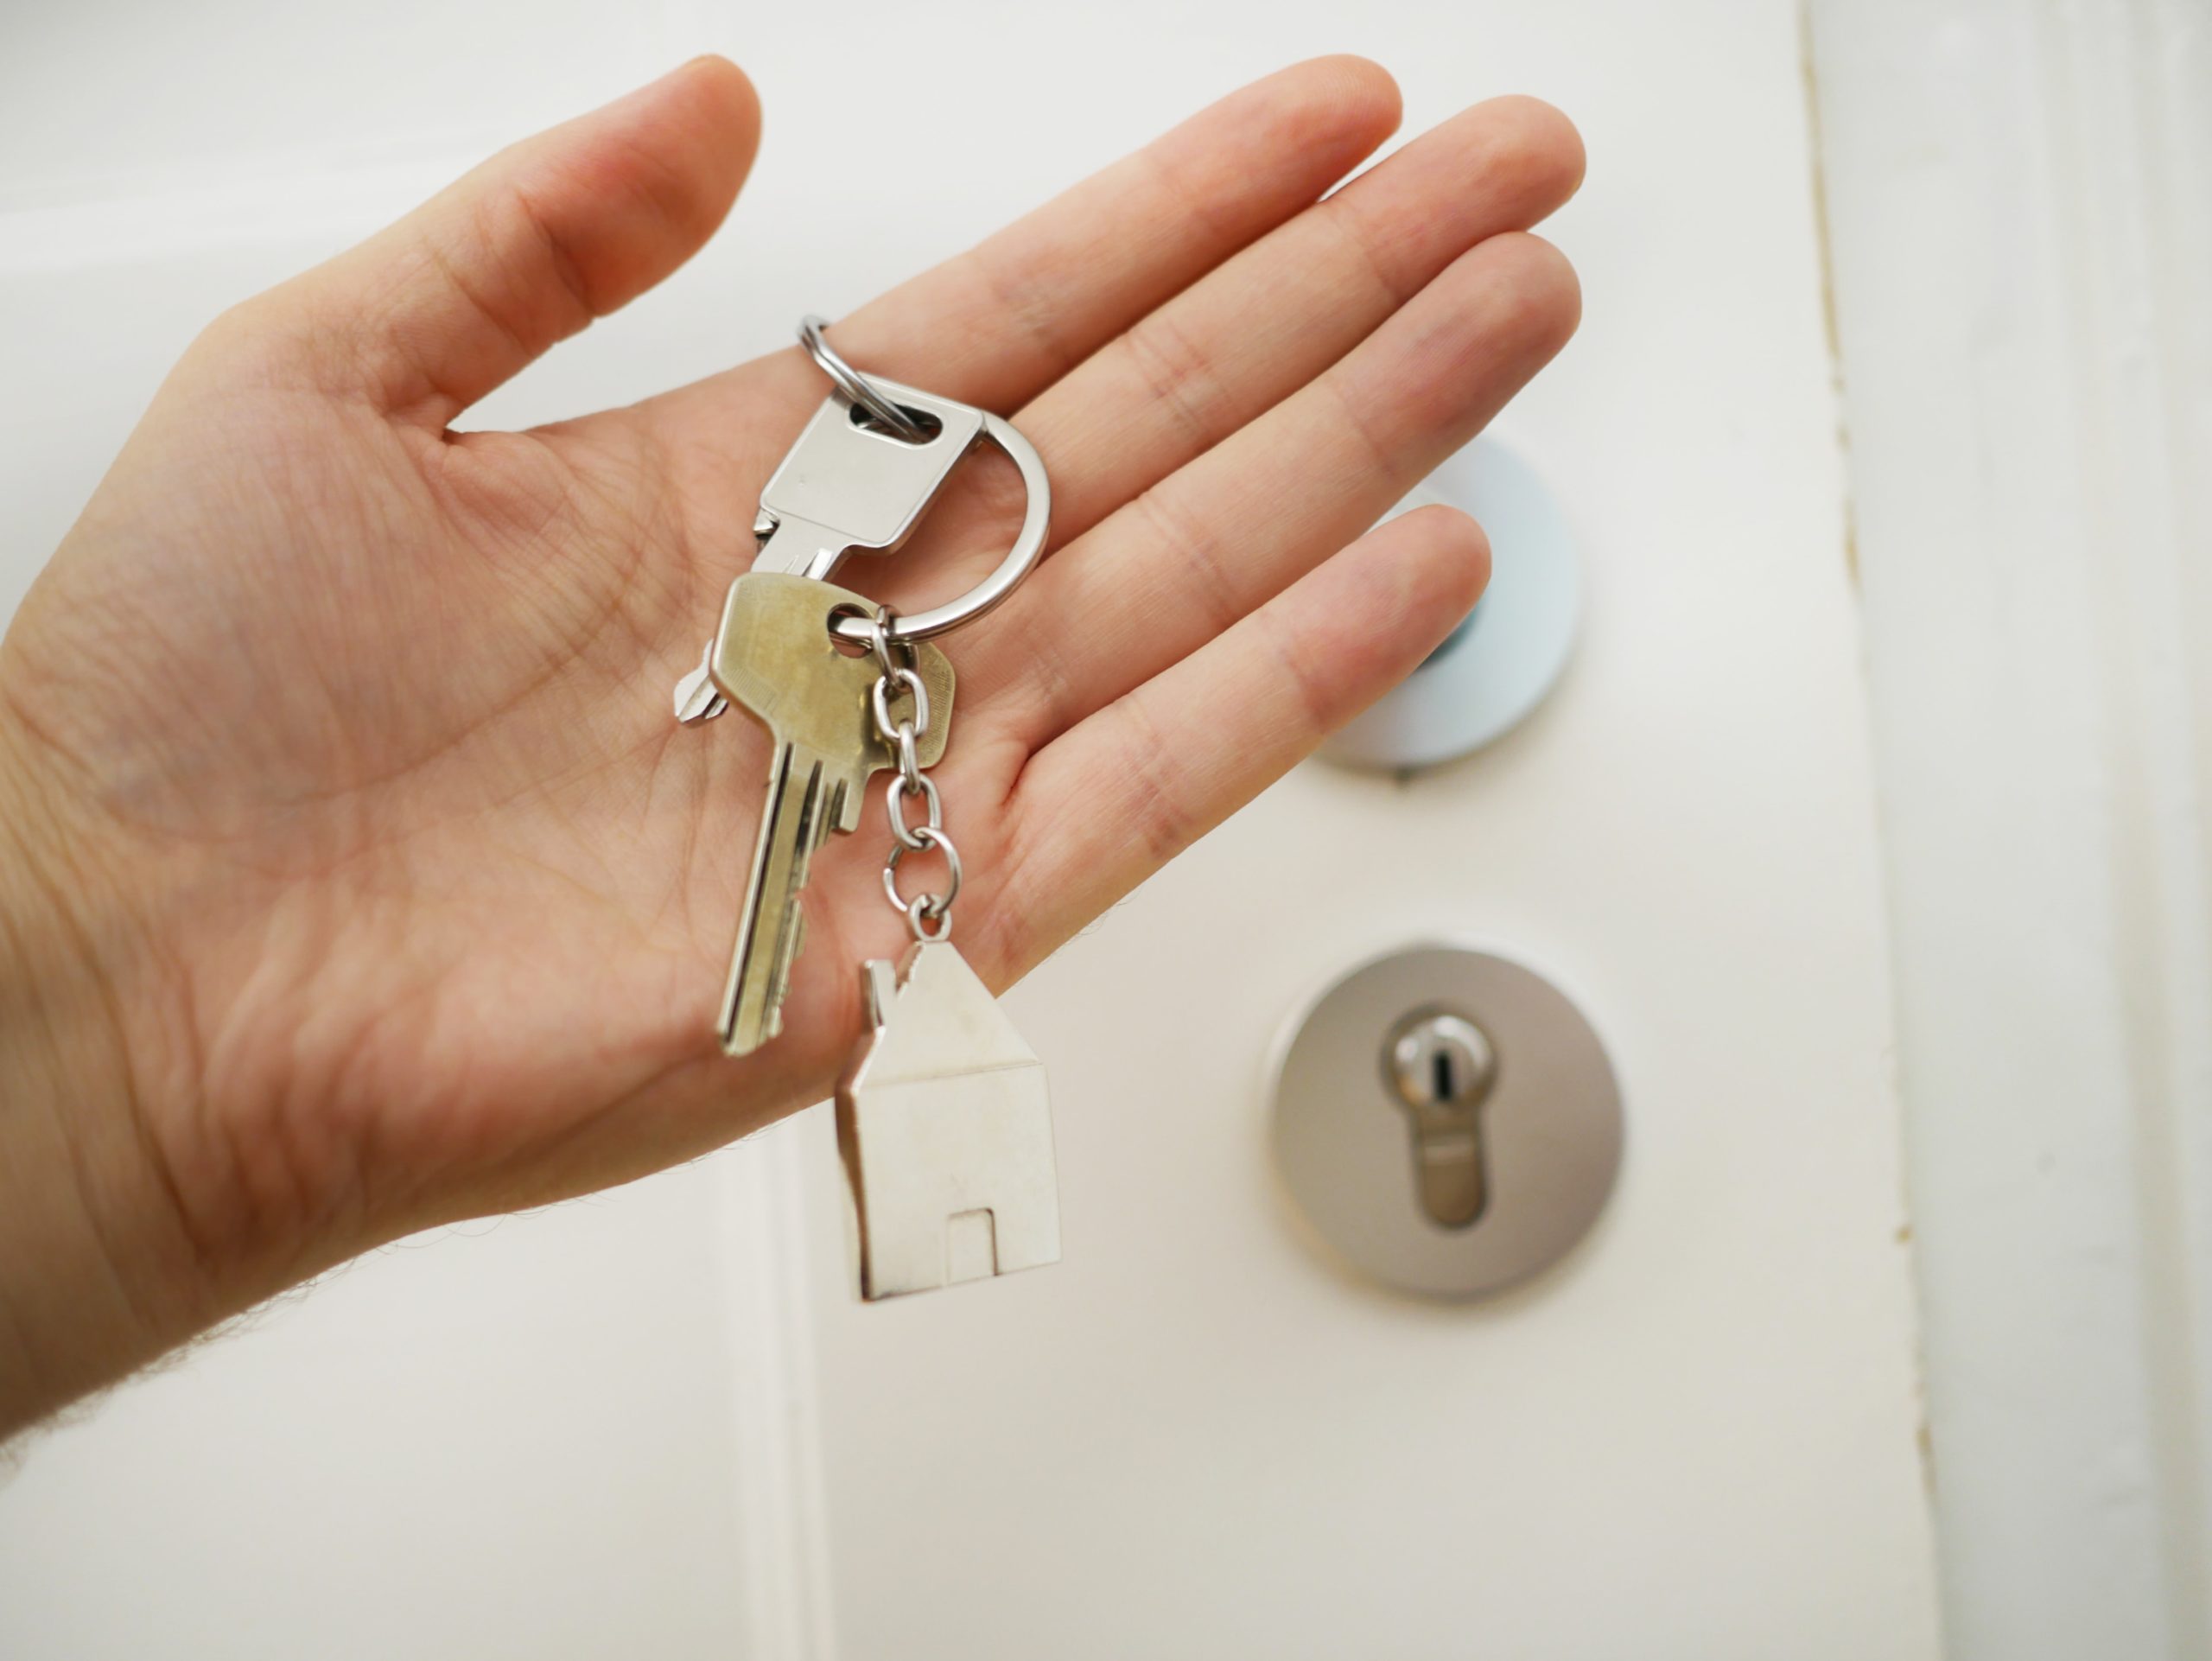 18 Questions Should You Ask Your Locksmith Before Rekeying Your Locks